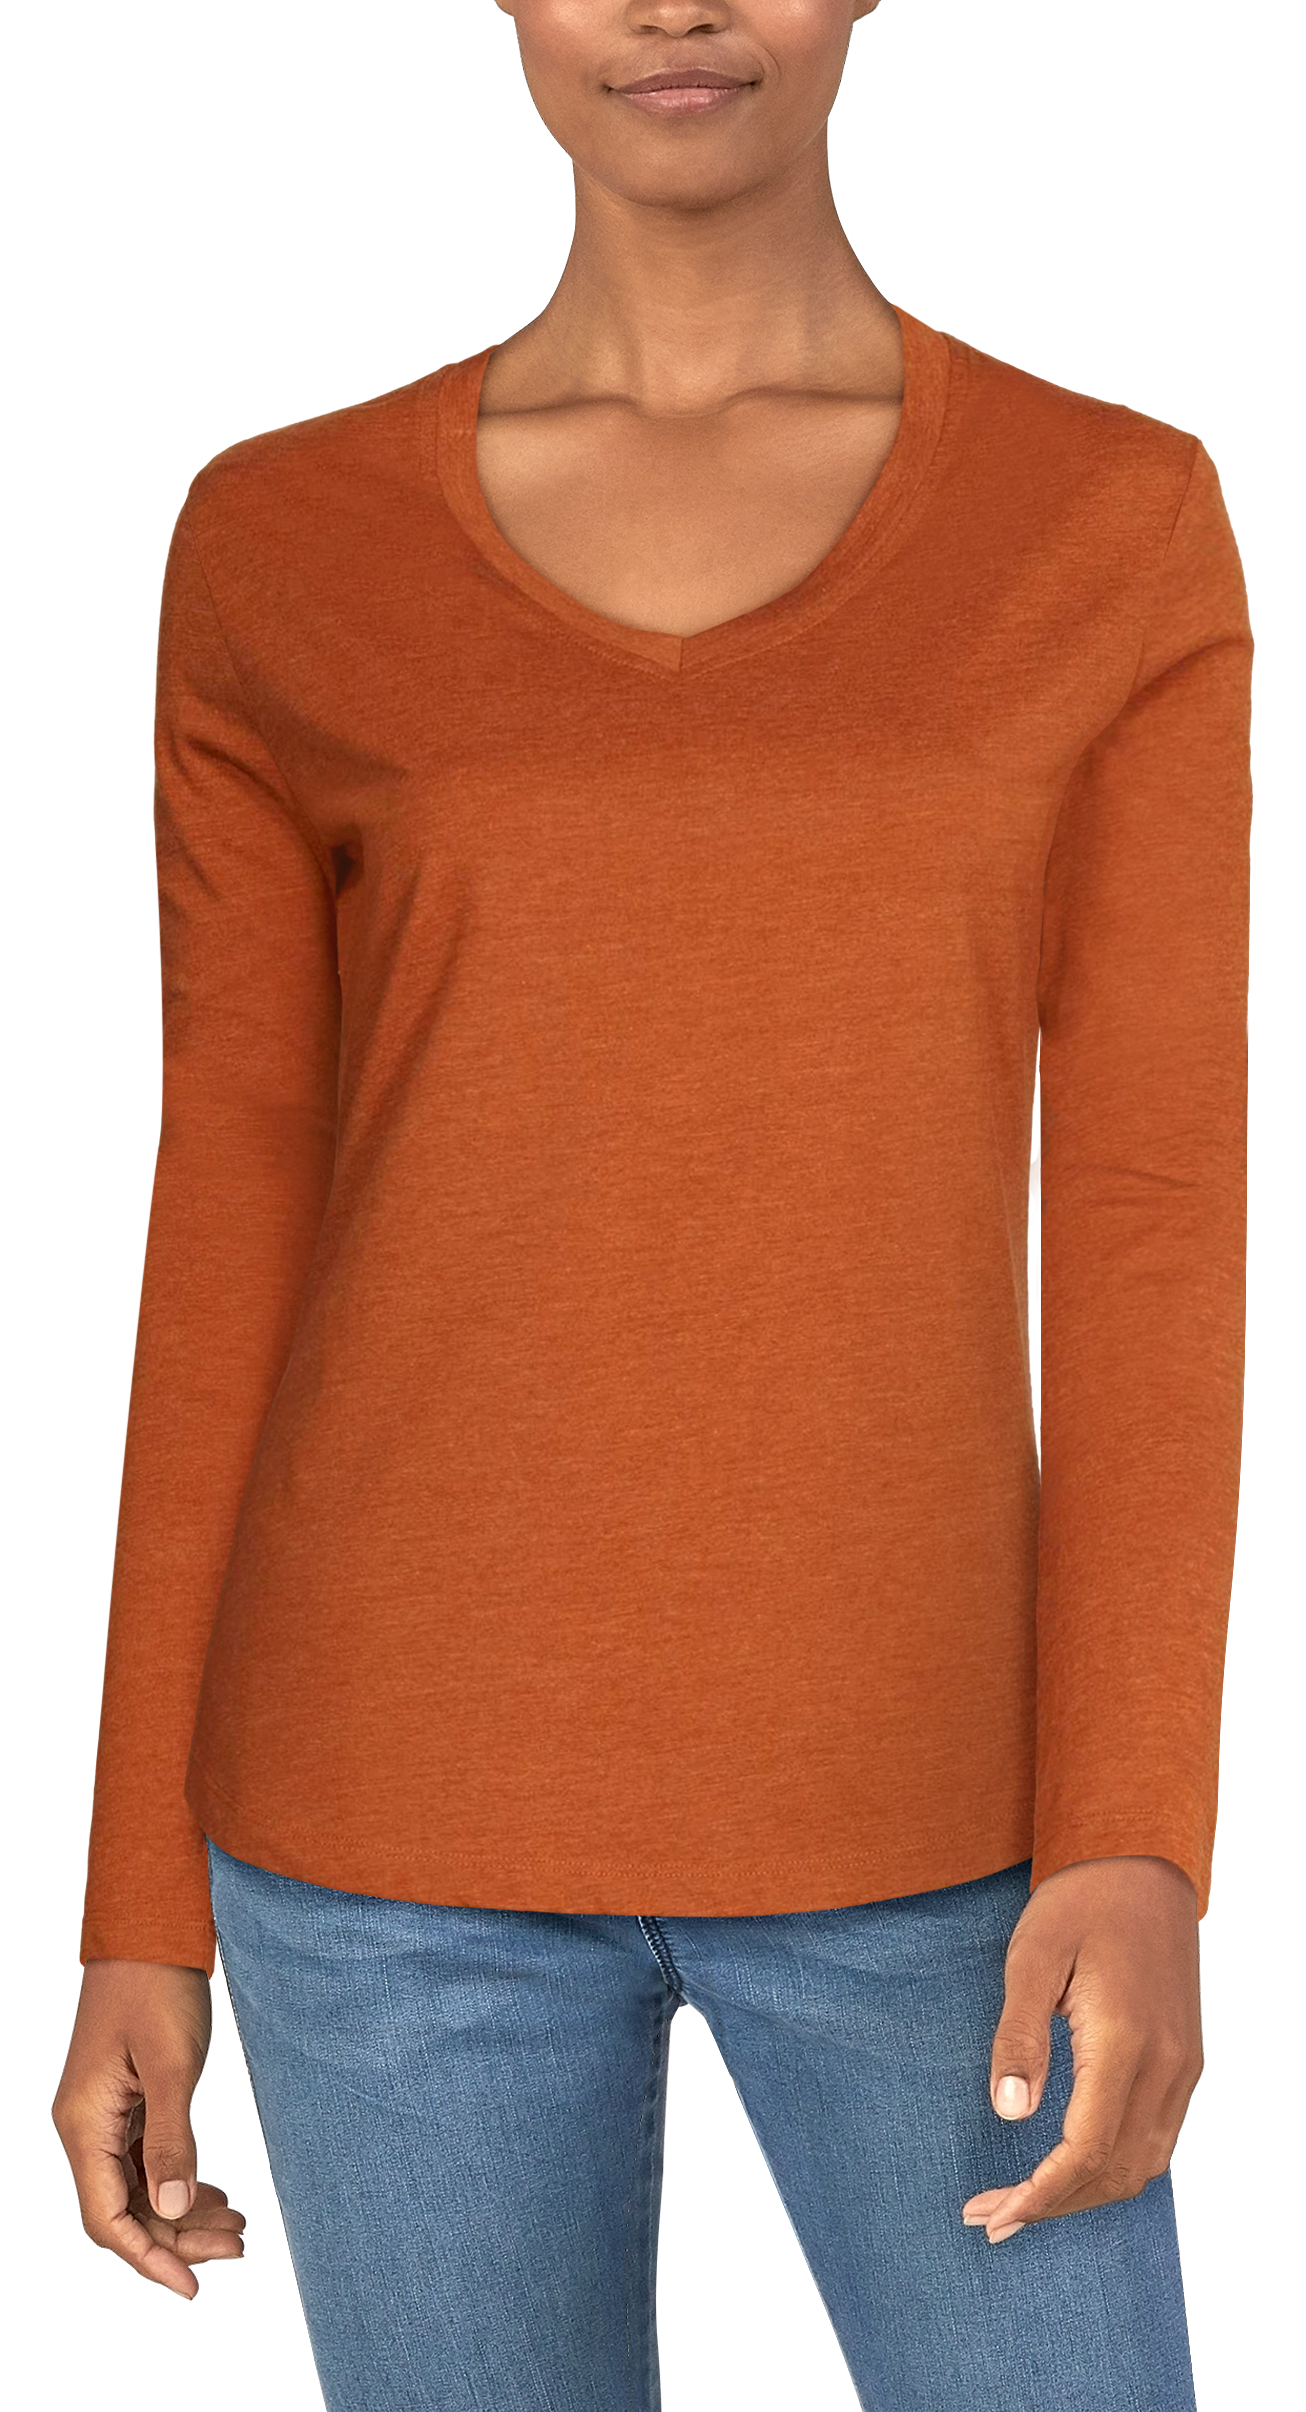 Natural Reflections Essential Long-Sleeve V-Neck T-Shirt for Ladies - Caramel Cafe - XL